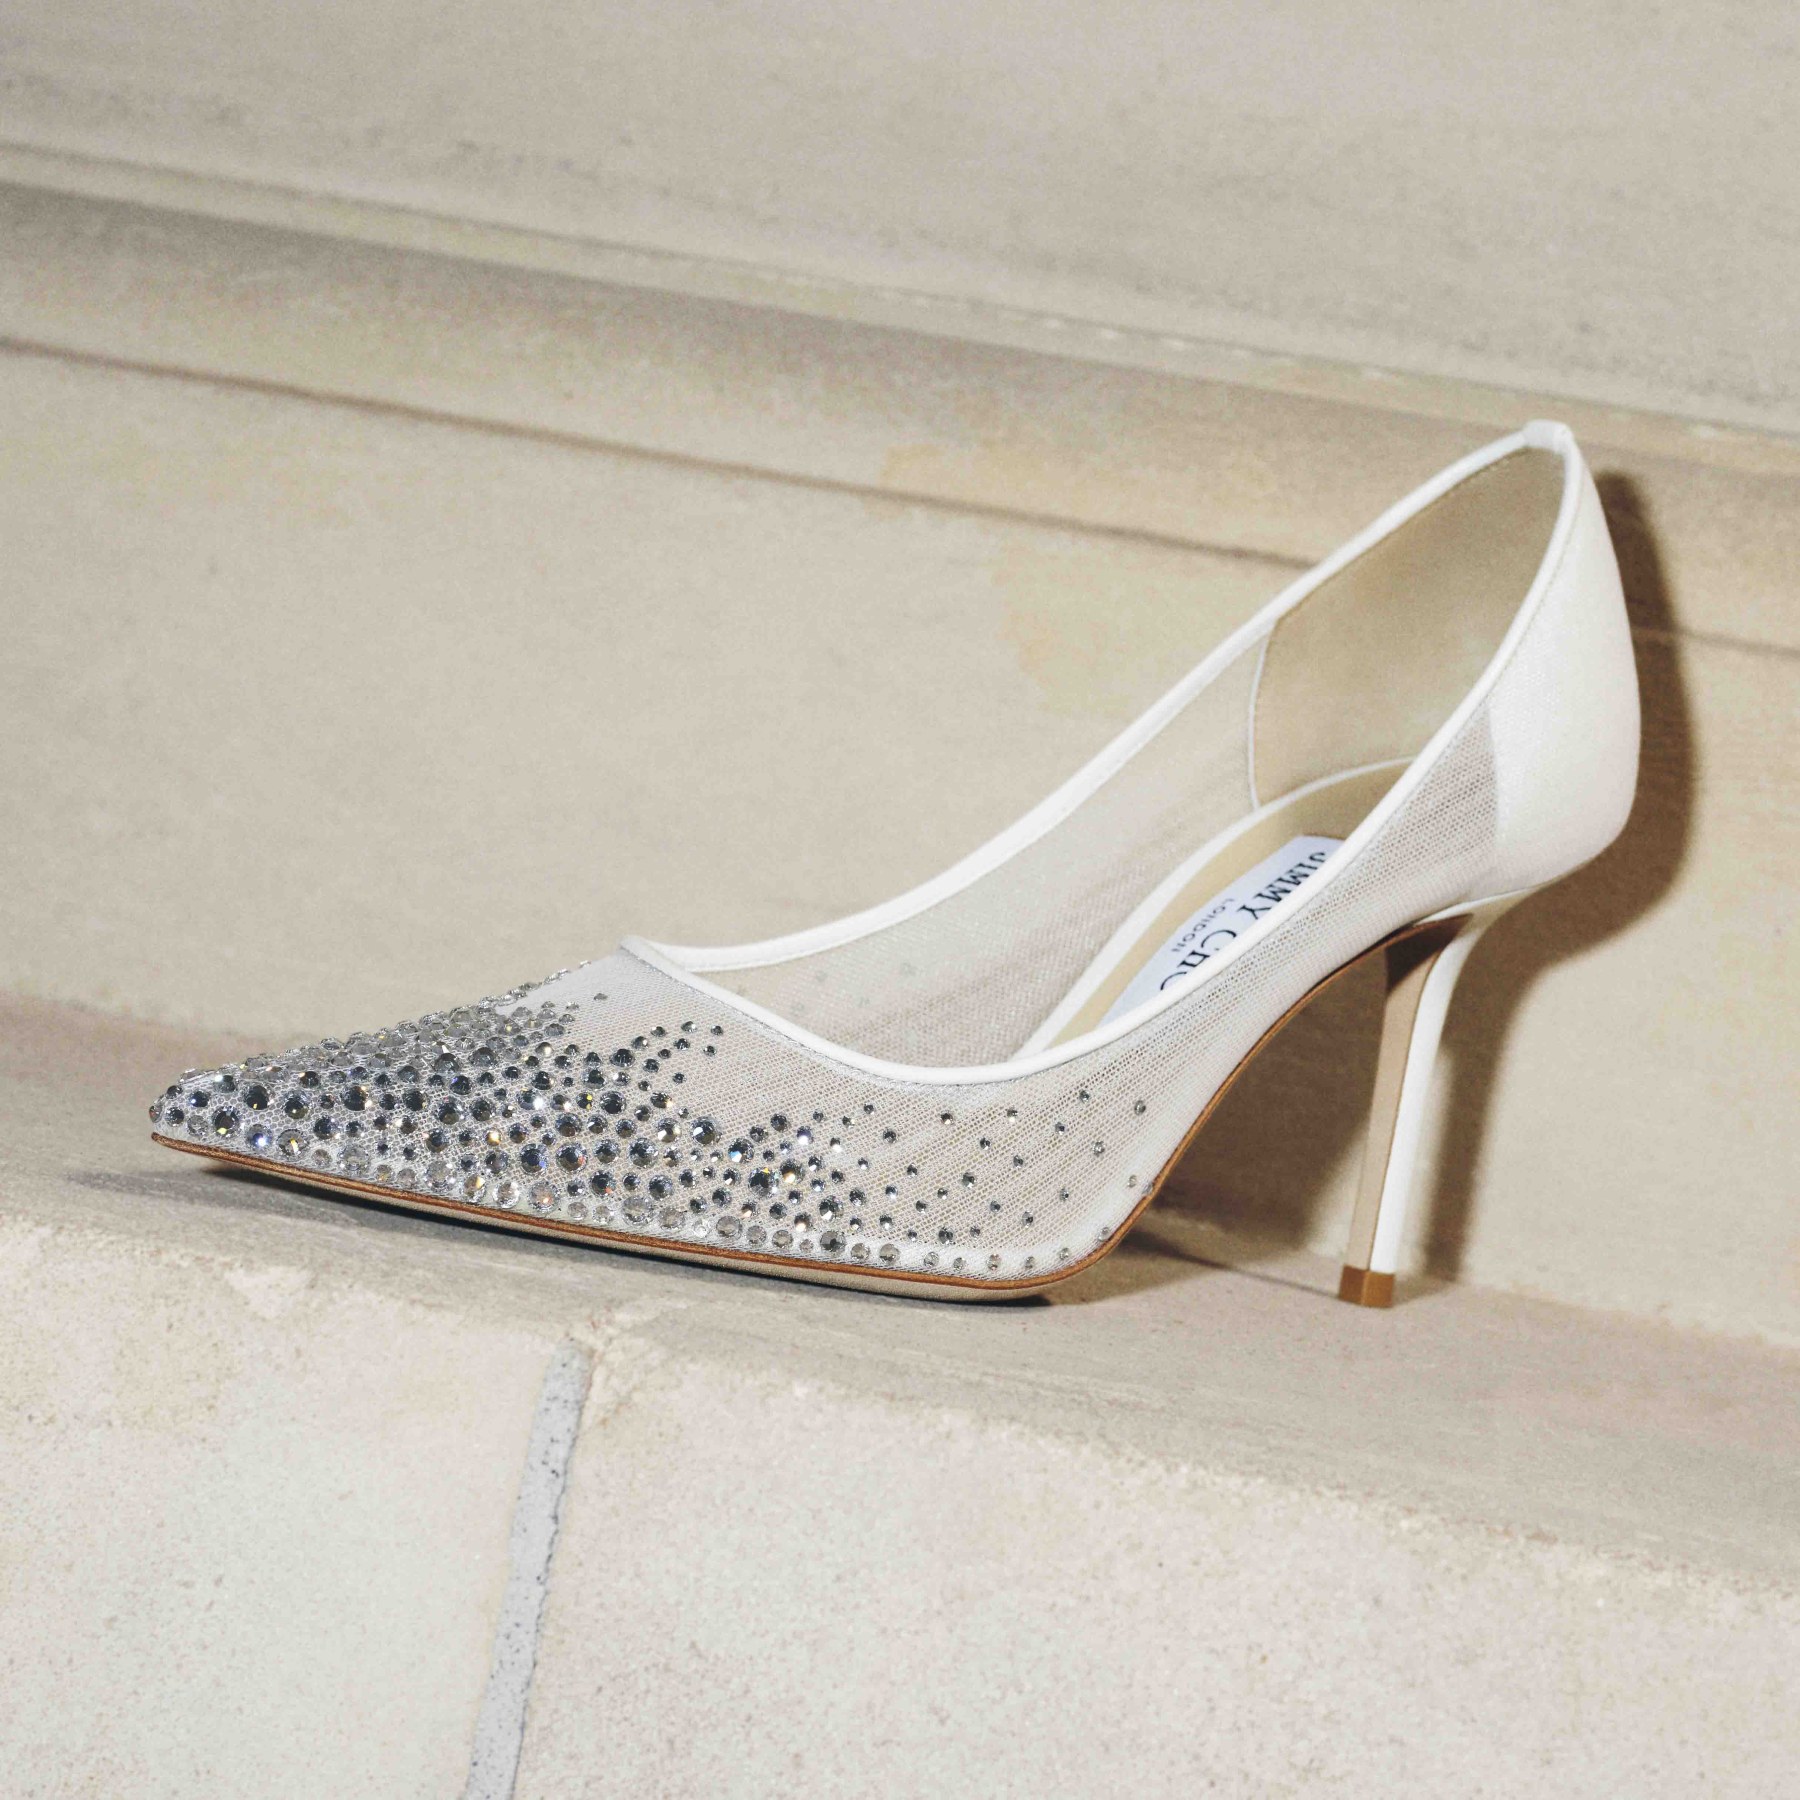 White Mesh Pointed-Toe Pumps with Dégradé Crystals | LOVE 85 